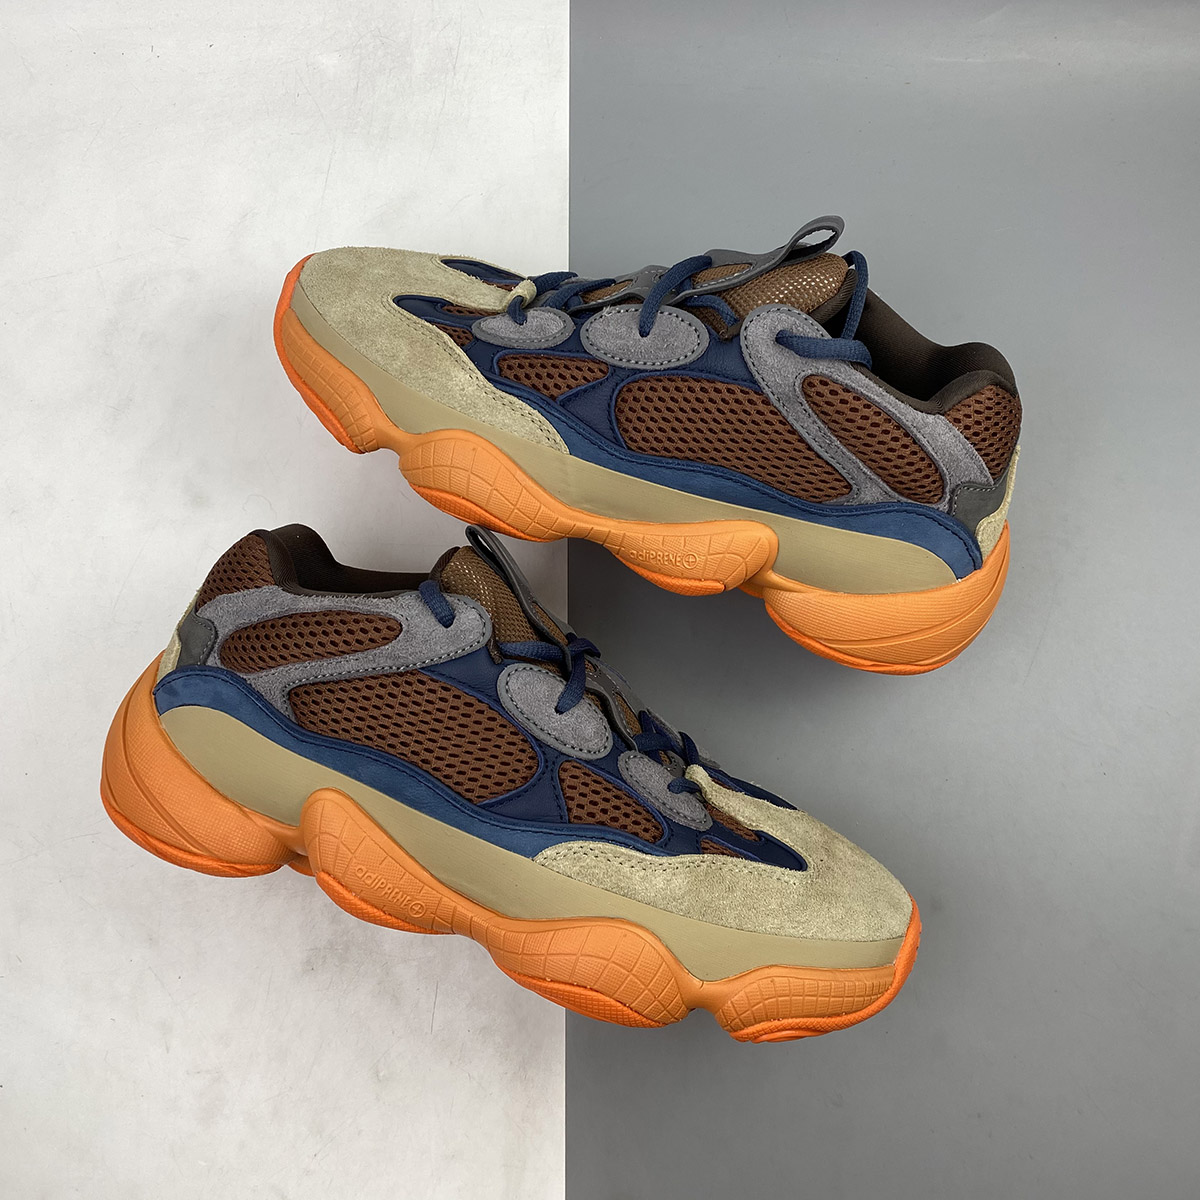 adidas Yeezy 500 ‘Enflame’ For Sale – The Sole Line